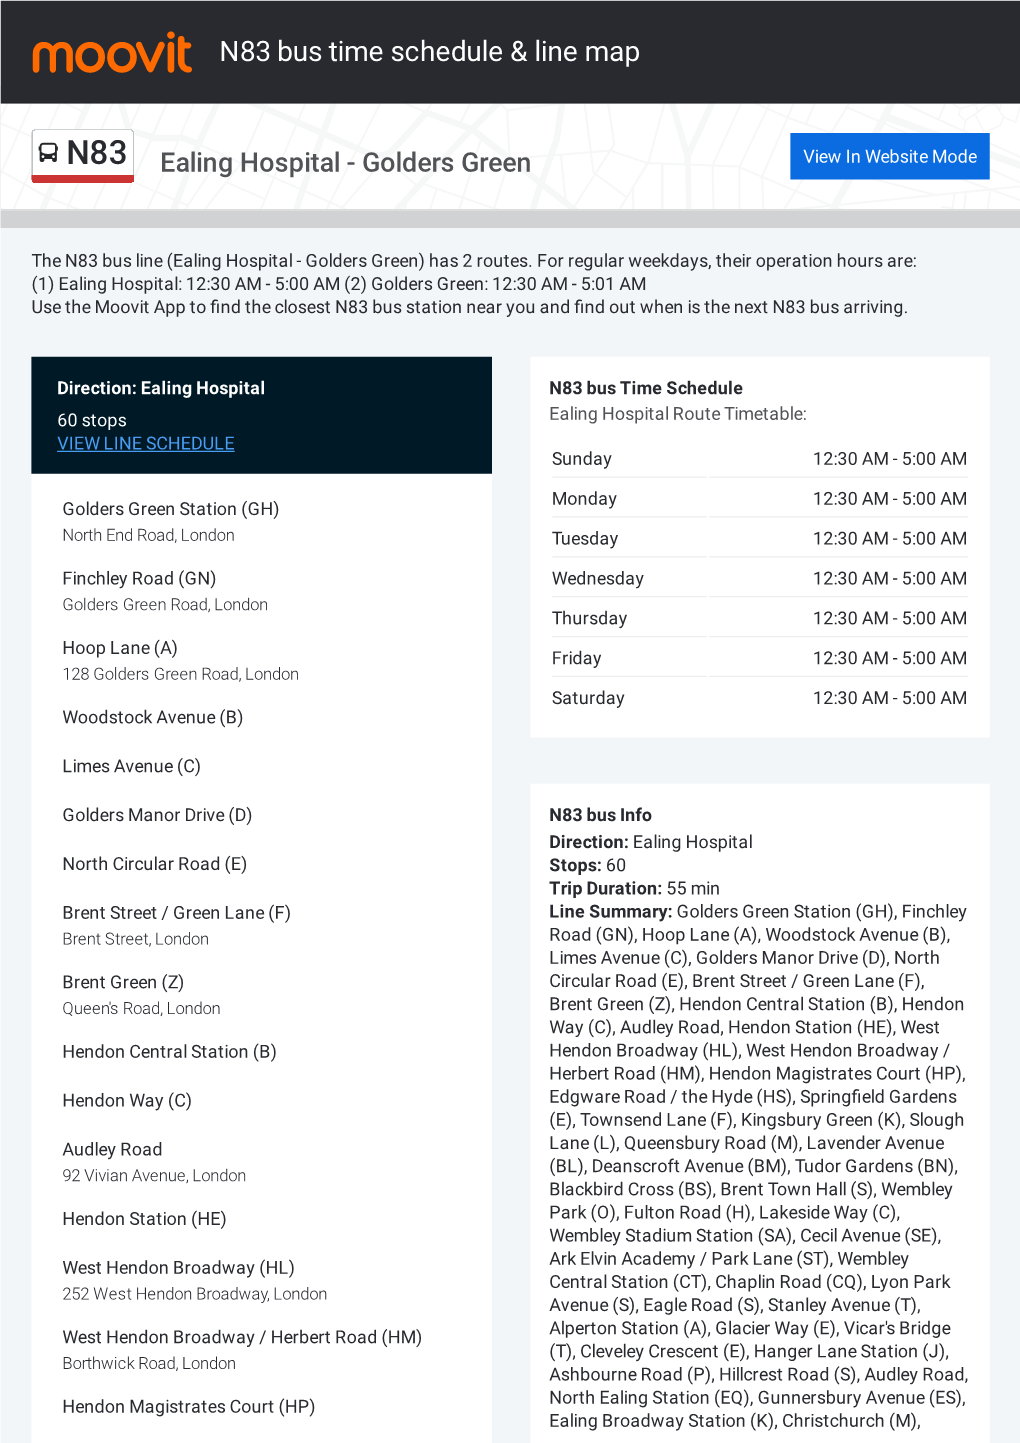 N83 Bus Time Schedule & Line Route